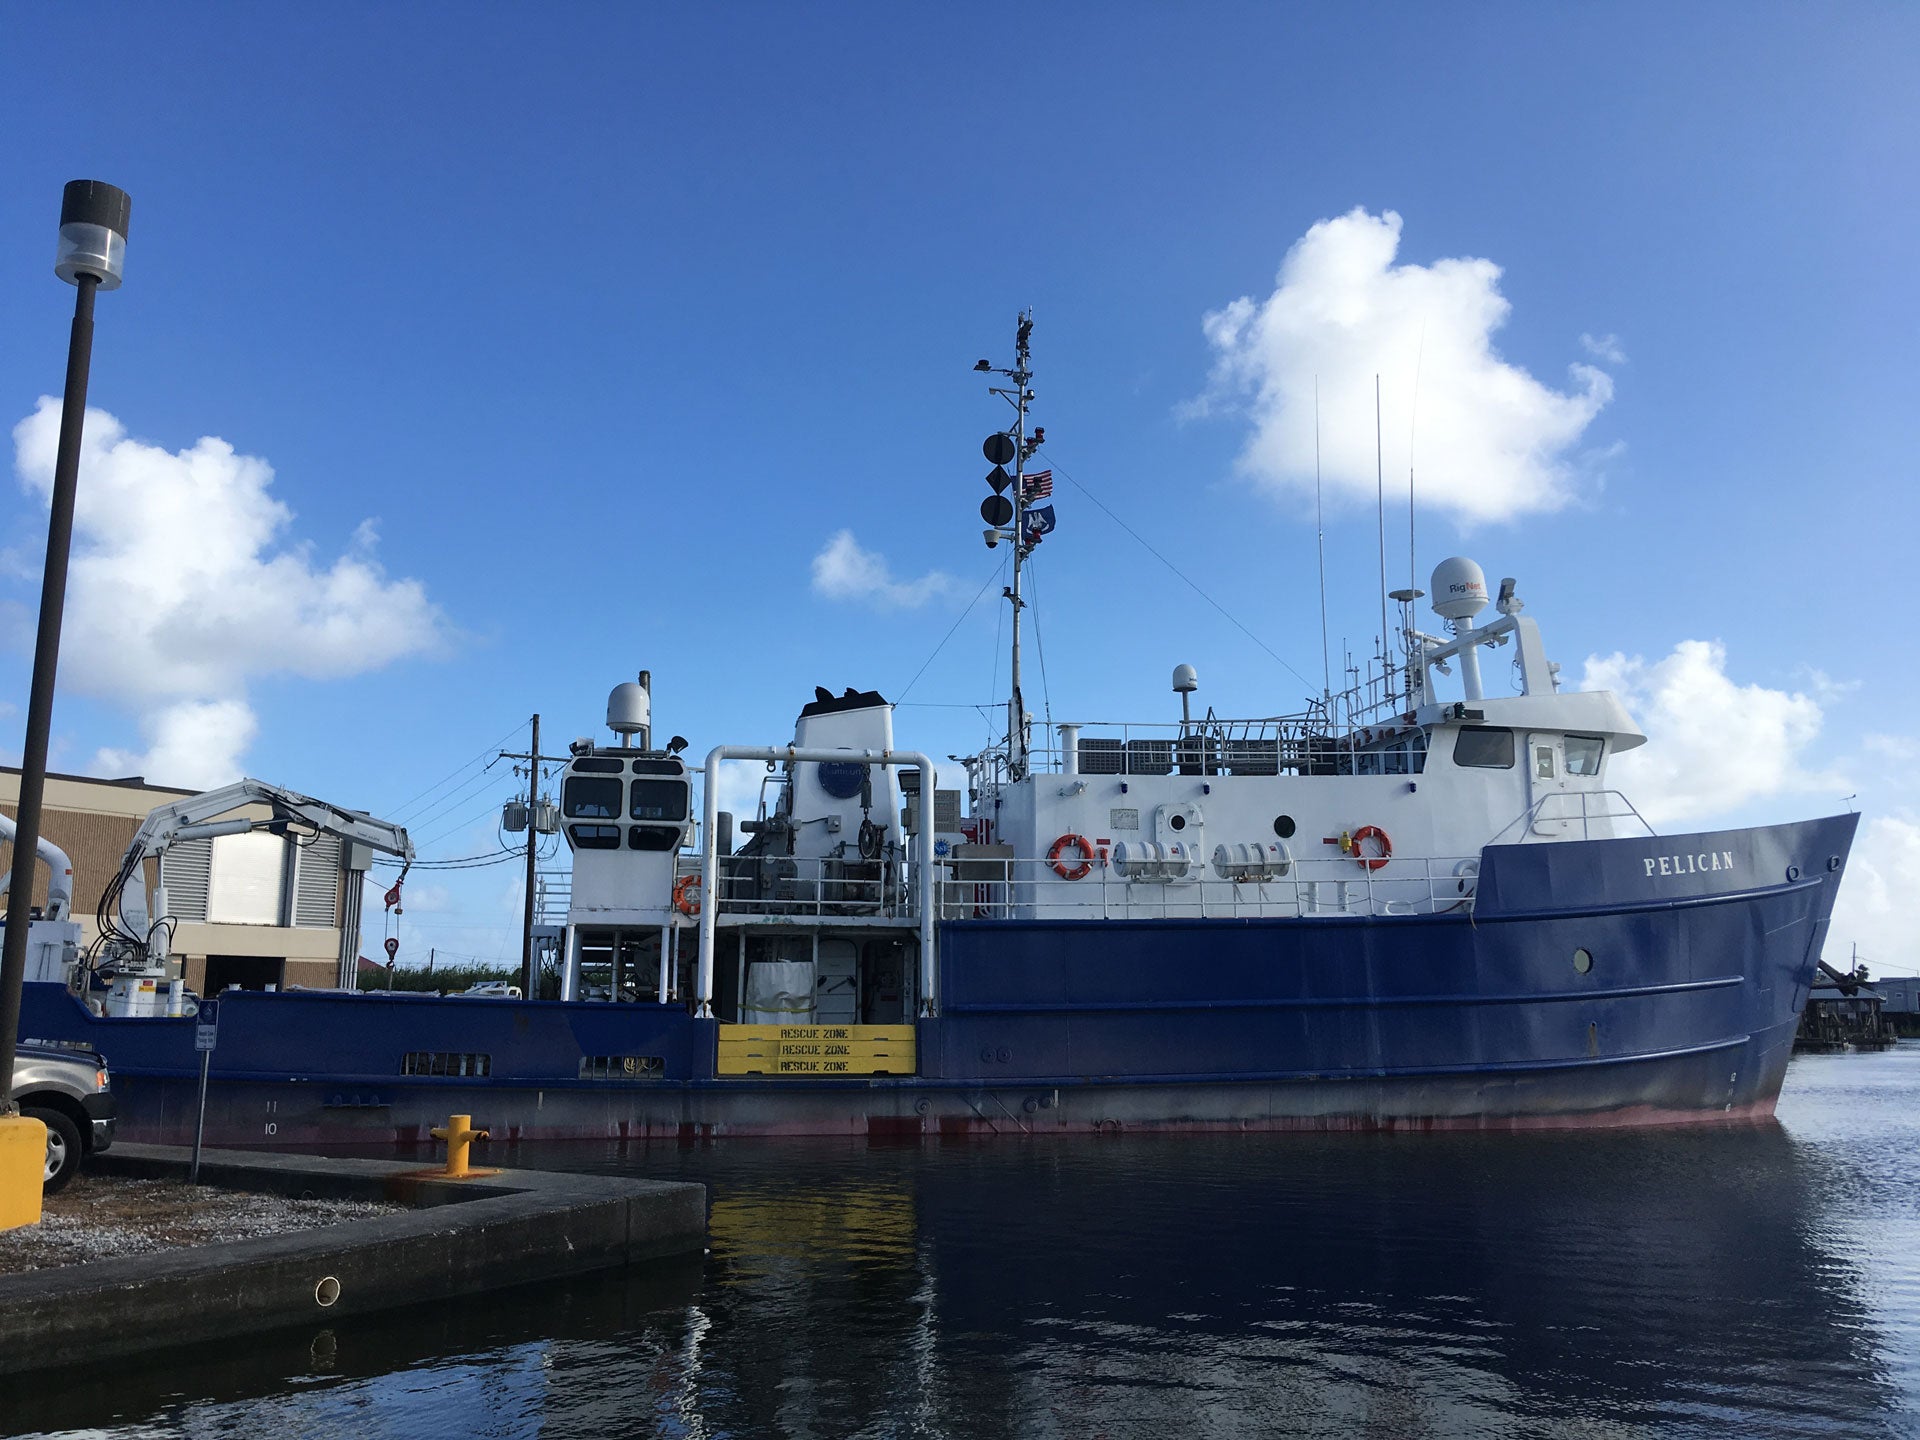 Photo of the Research Vessel Pelican, docked.